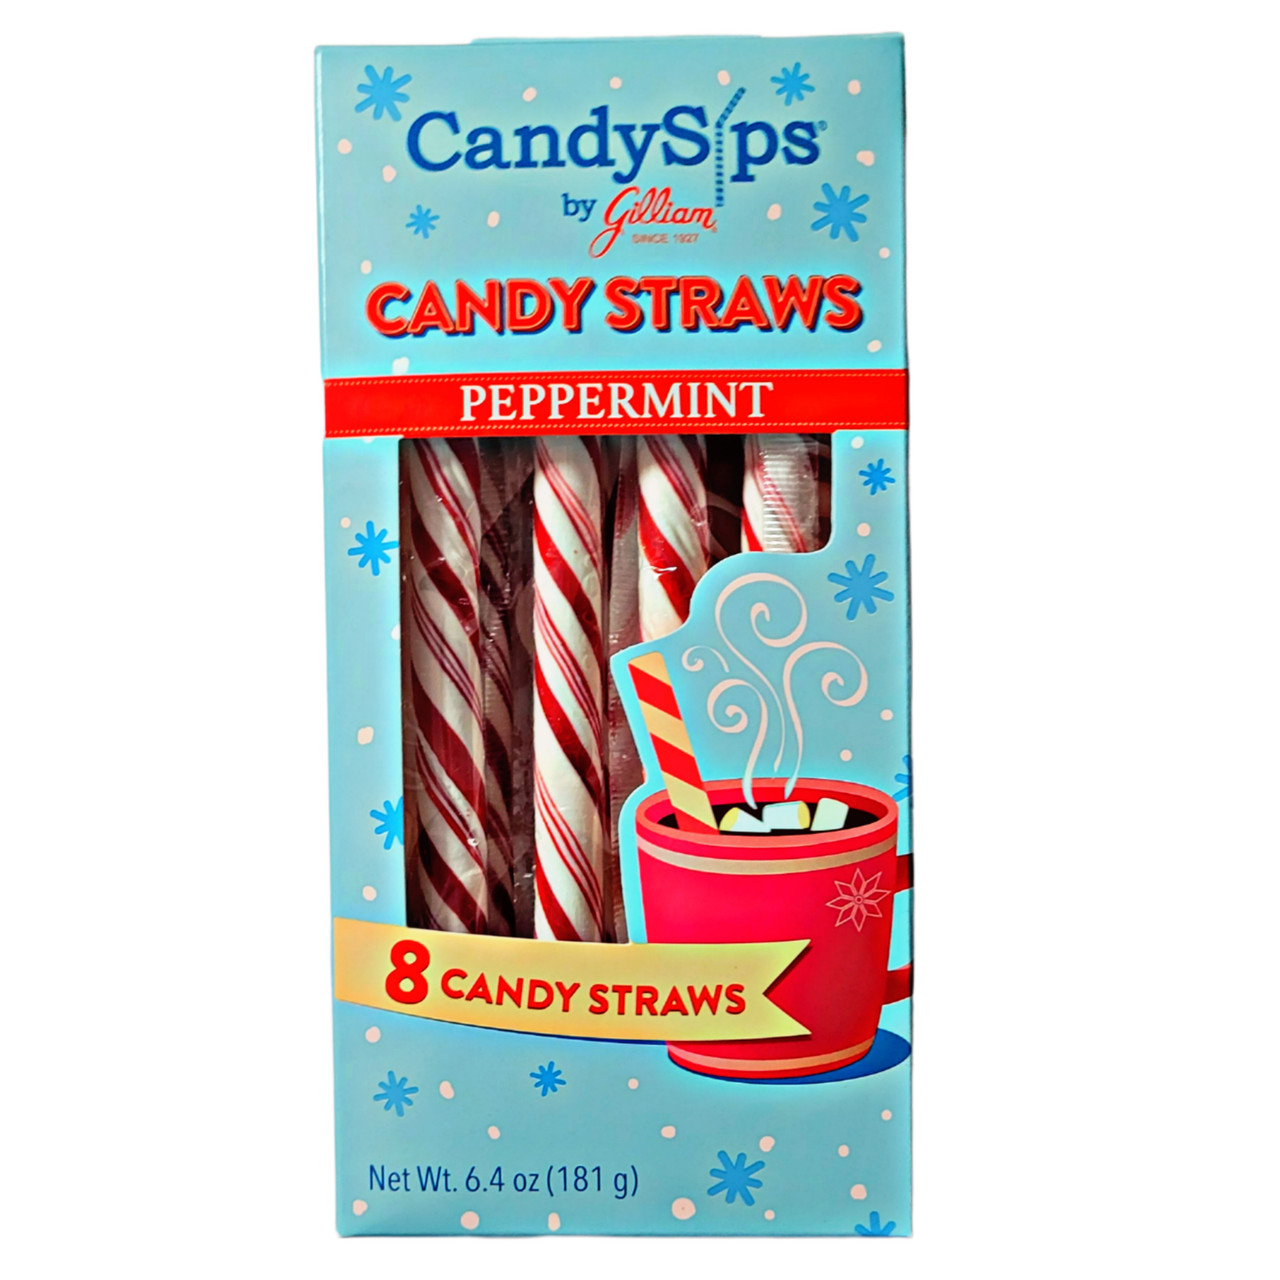 Candy Straws Peppermint